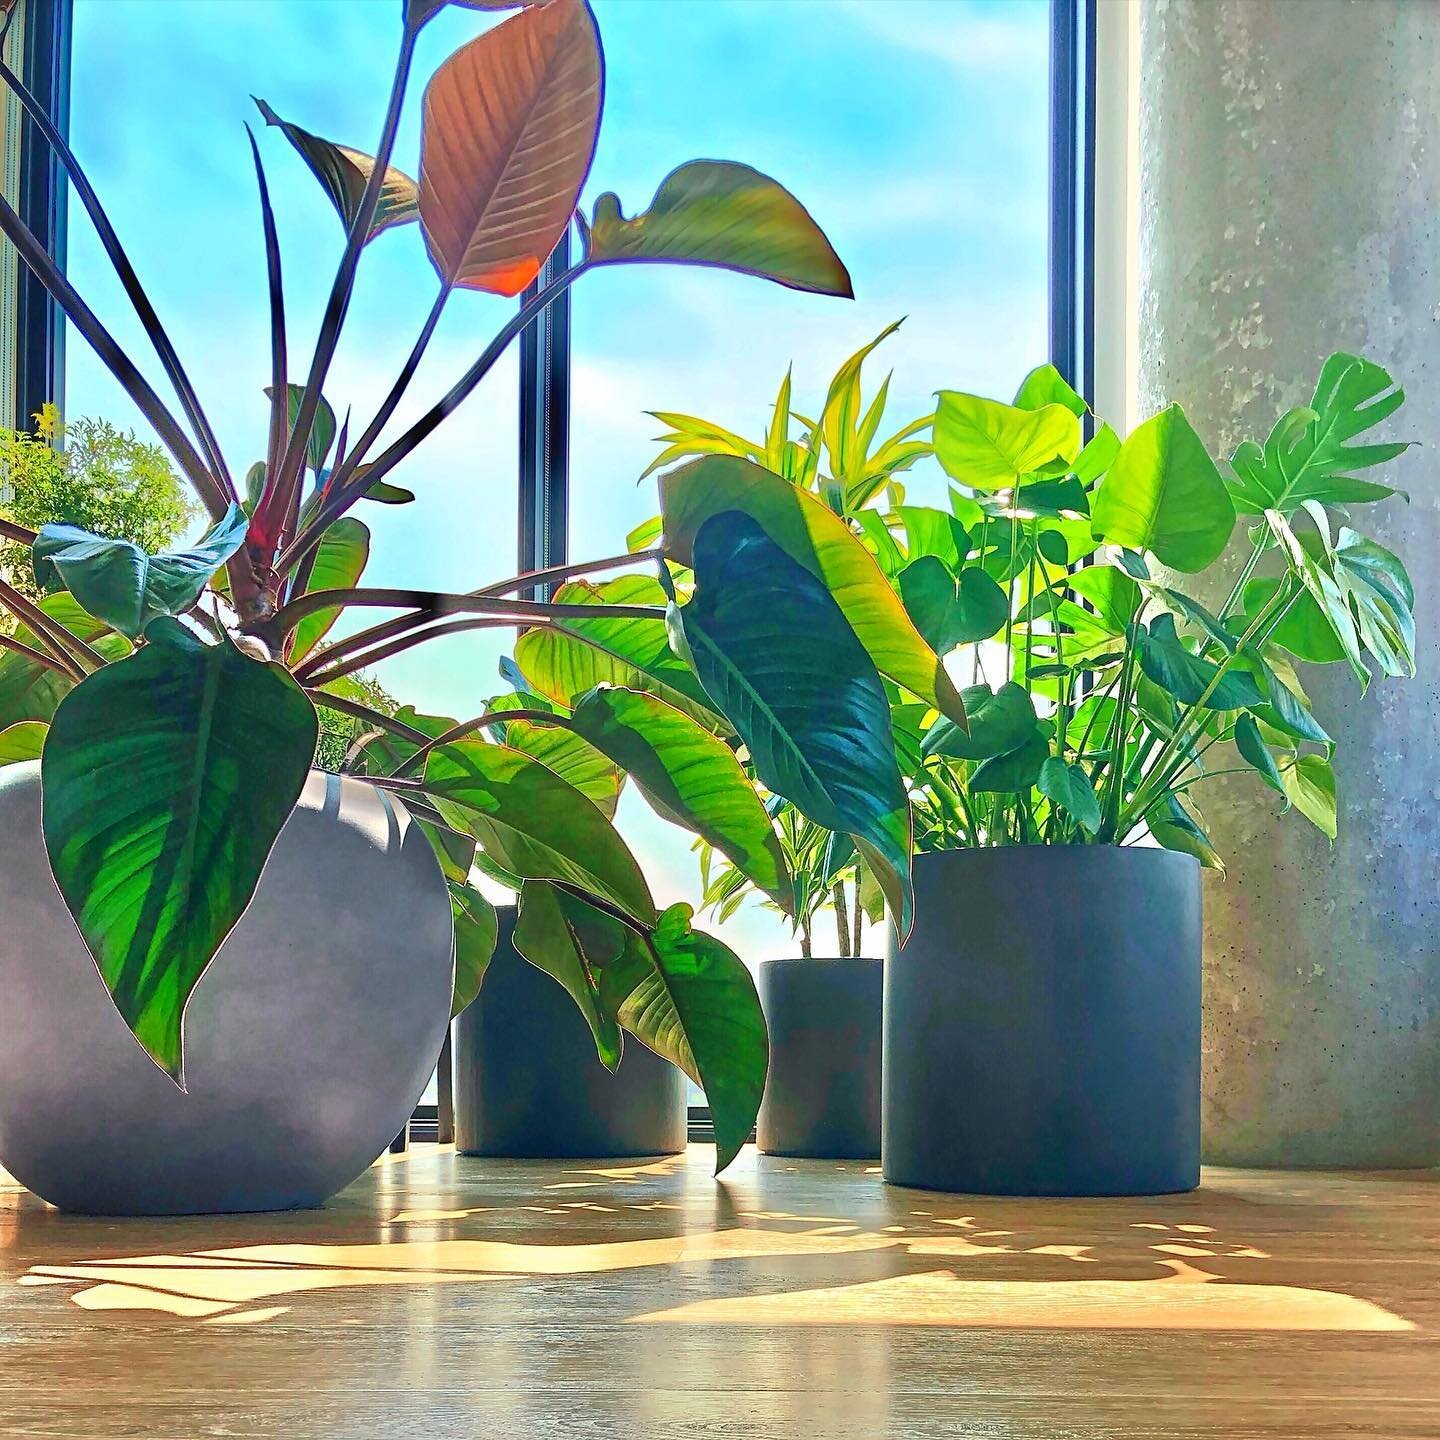 My new #PlantChildren are loving all the natural light in our new place 🌱🌞🌿 Do you recognize any of these? @therodneypdx #PlantsGiveMeLife #AmazonHome 
. 
. 
. 
. 
. 
. 
#TheRodney #PDX #PortlandNursery #PlantsPlantsPlants #PistilsNursery #Monster